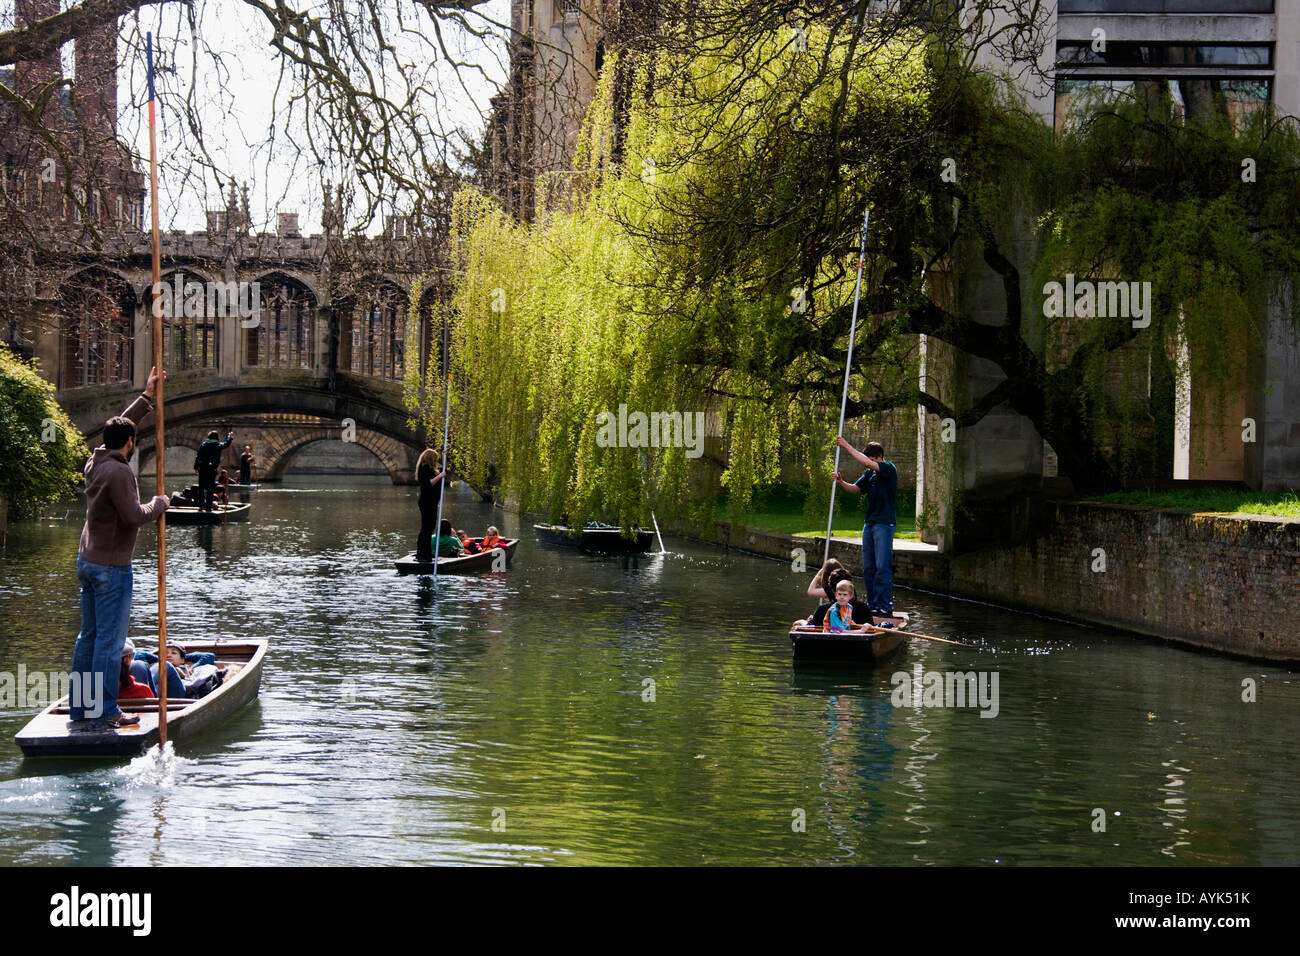 The Bridge of Sighs. Punting into the light. Cambridge. Stock Photo